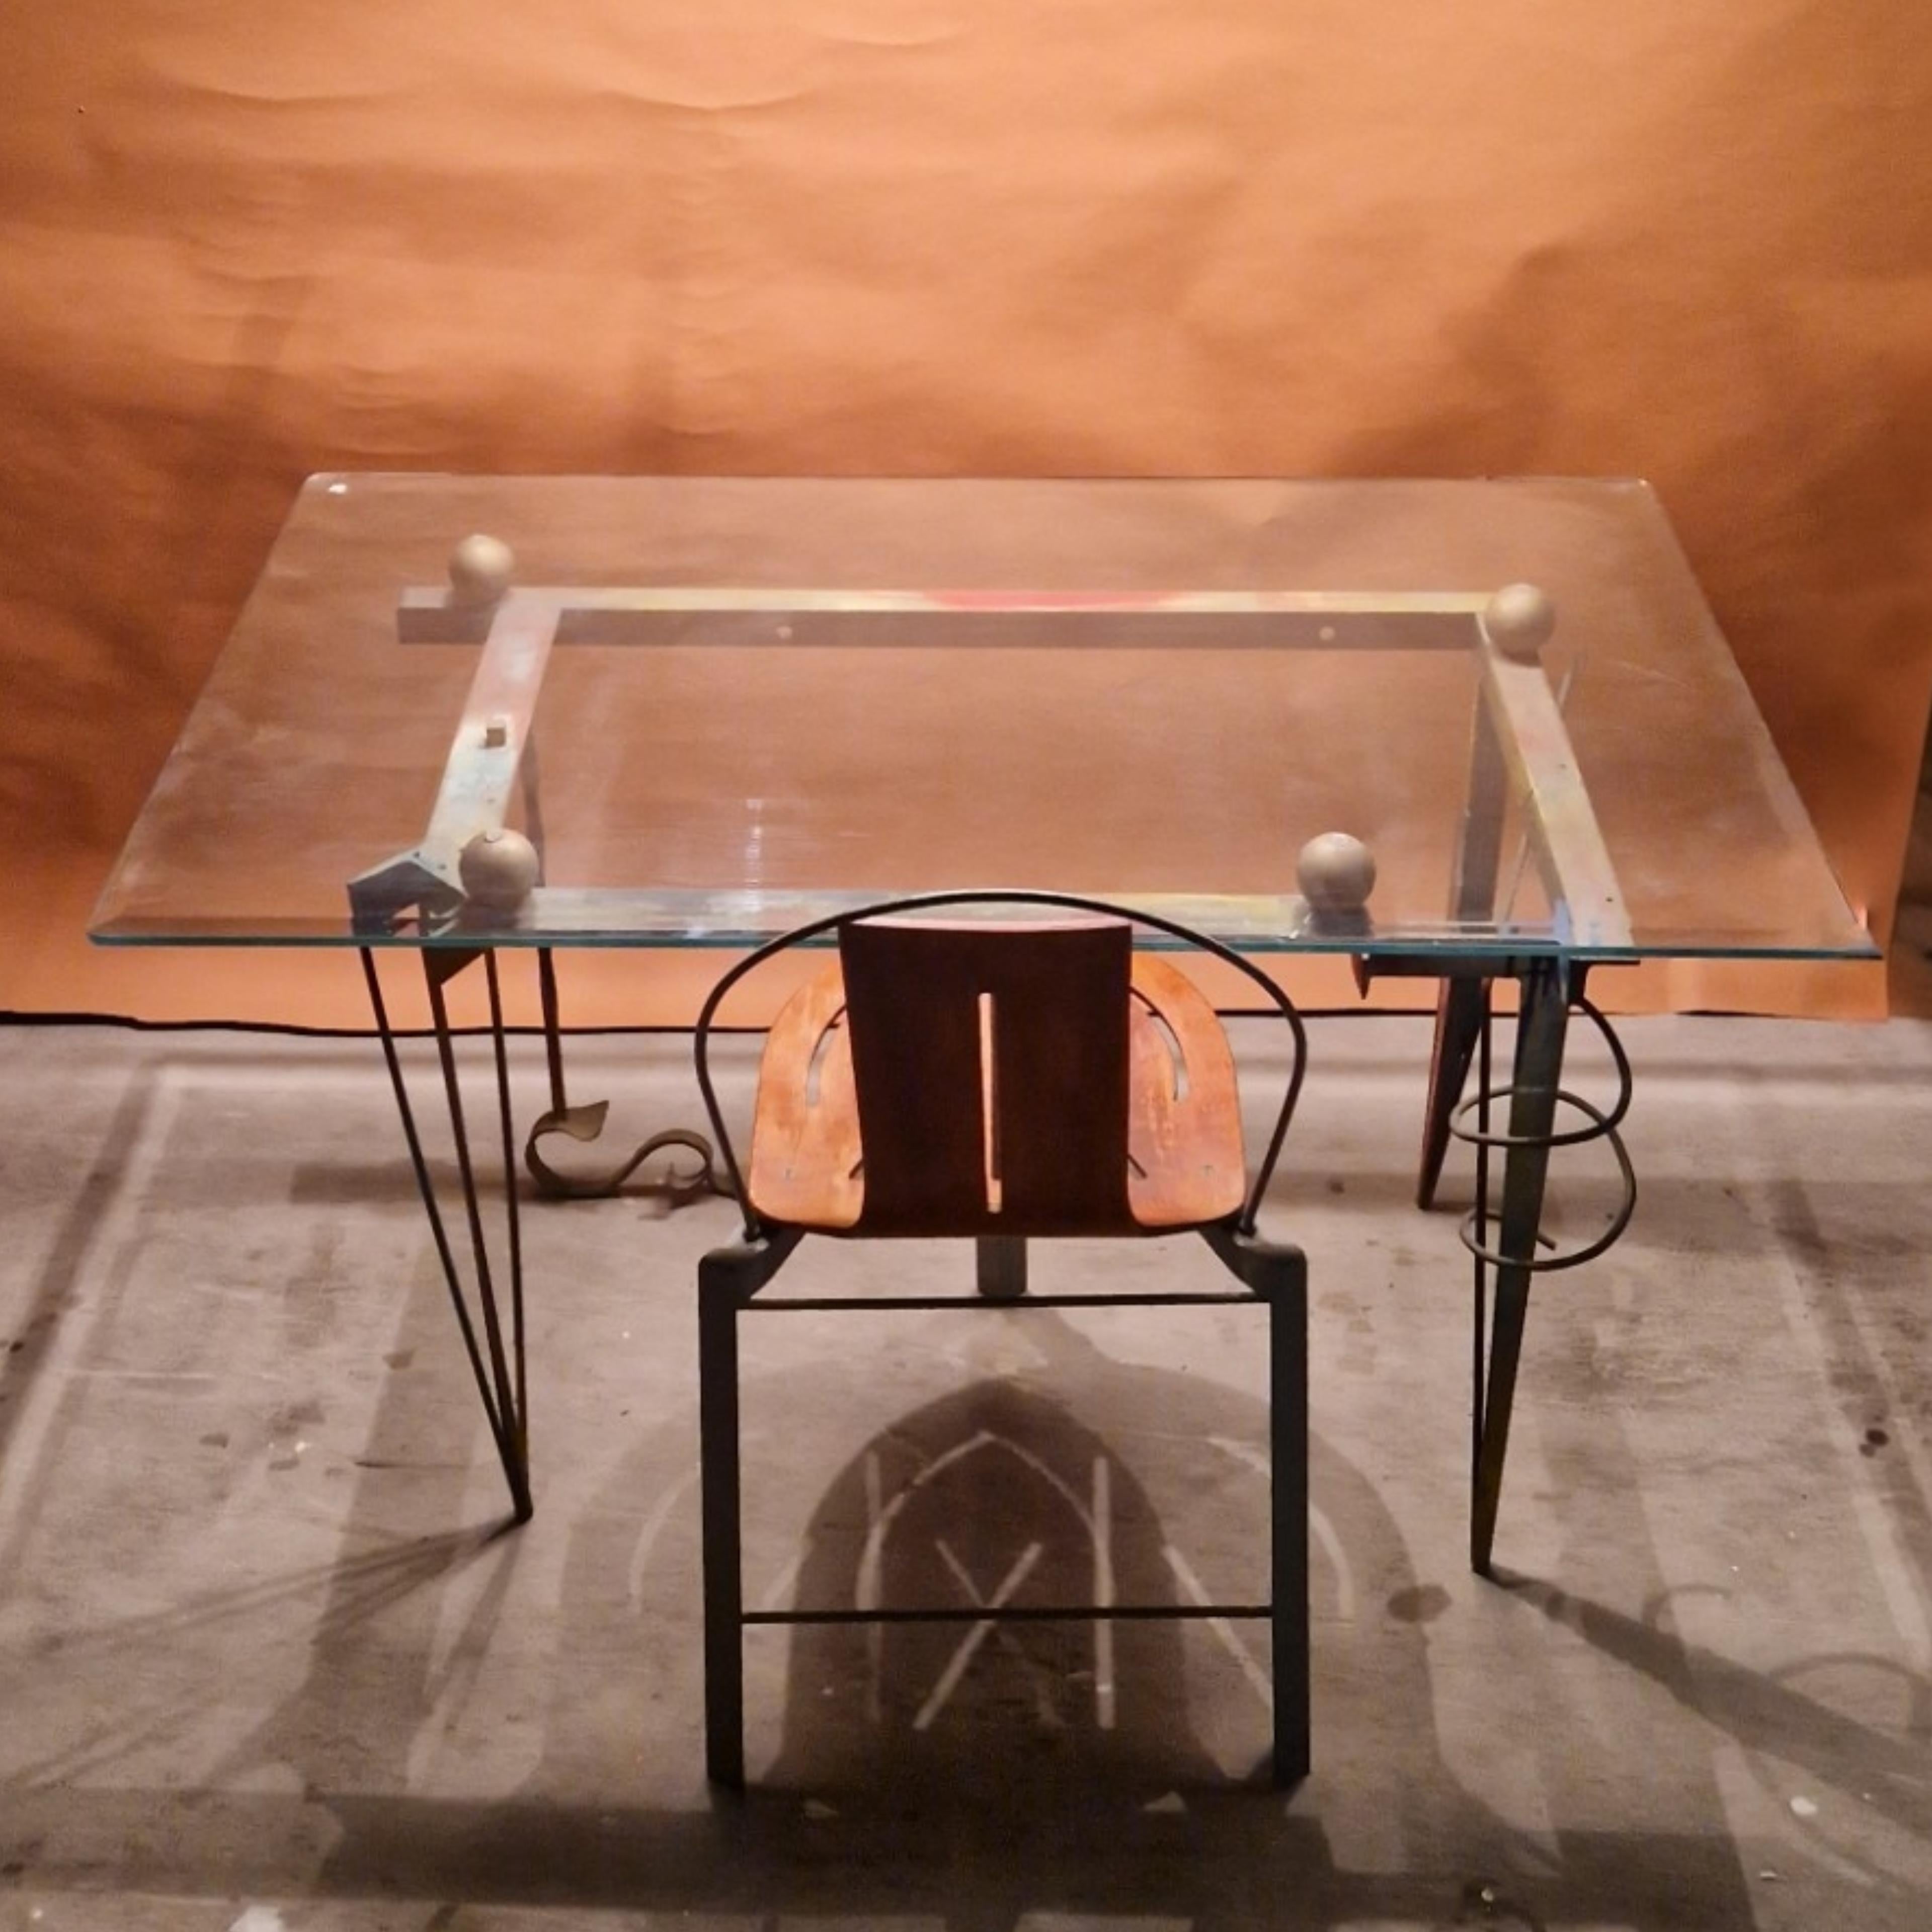 Forged Post modern Memphis style artistic writing desk and chair, Germany 1980s For Sale